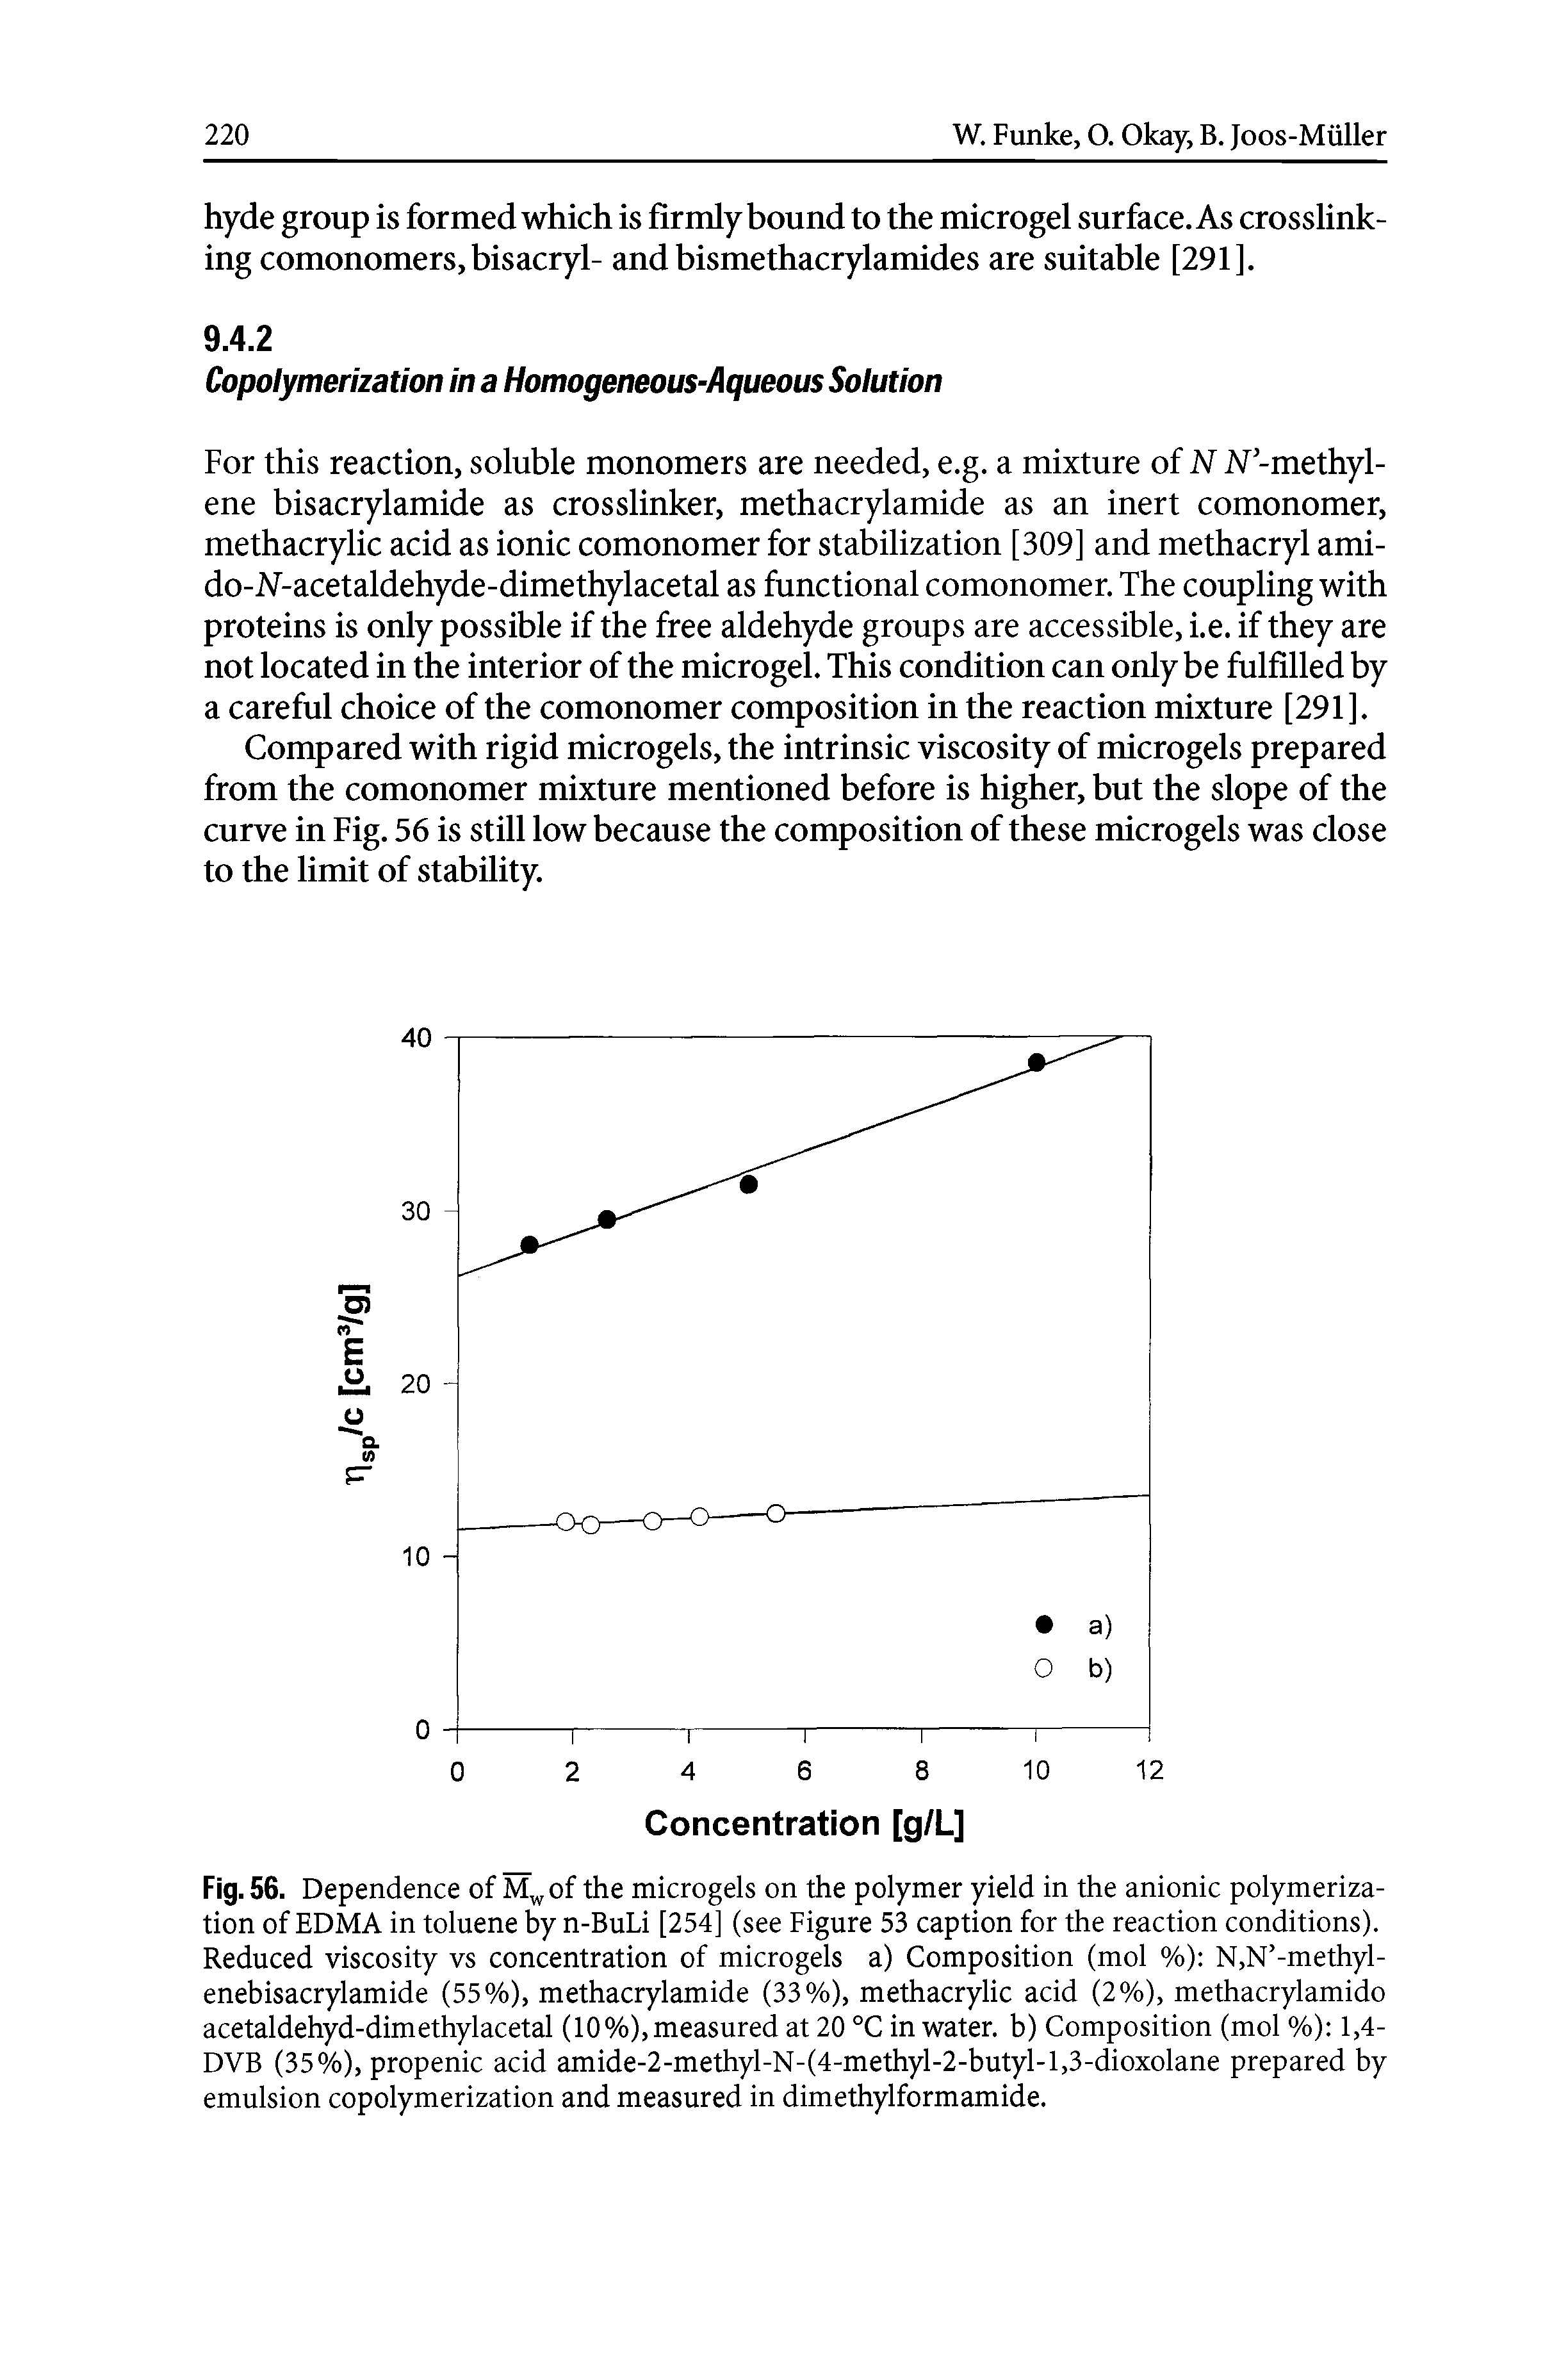 Fig. 56. Dependence of Mwof the microgels on the polymer yield in the anionic polymerization of EDMA in toluene by n-BuLi [254] (see Figure 53 caption for the reaction conditions). Reduced viscosity vs concentration of microgels a) Composition (mol %) N,N -methyl-enebisacrylamide (55%), methacrylamide (33%), methacrylic acid (2%), methacrylamido acetaldehyd-dimethylacetal (10%),measured at 20 °C in water, b) Composition (mol %) 1,4-DVB (35%), propenic acid amide-2-methyl-N-(4-methyl-2-butyl-l,3-dioxolane prepared by emulsion copolymerization and measured in dimethylformamide.